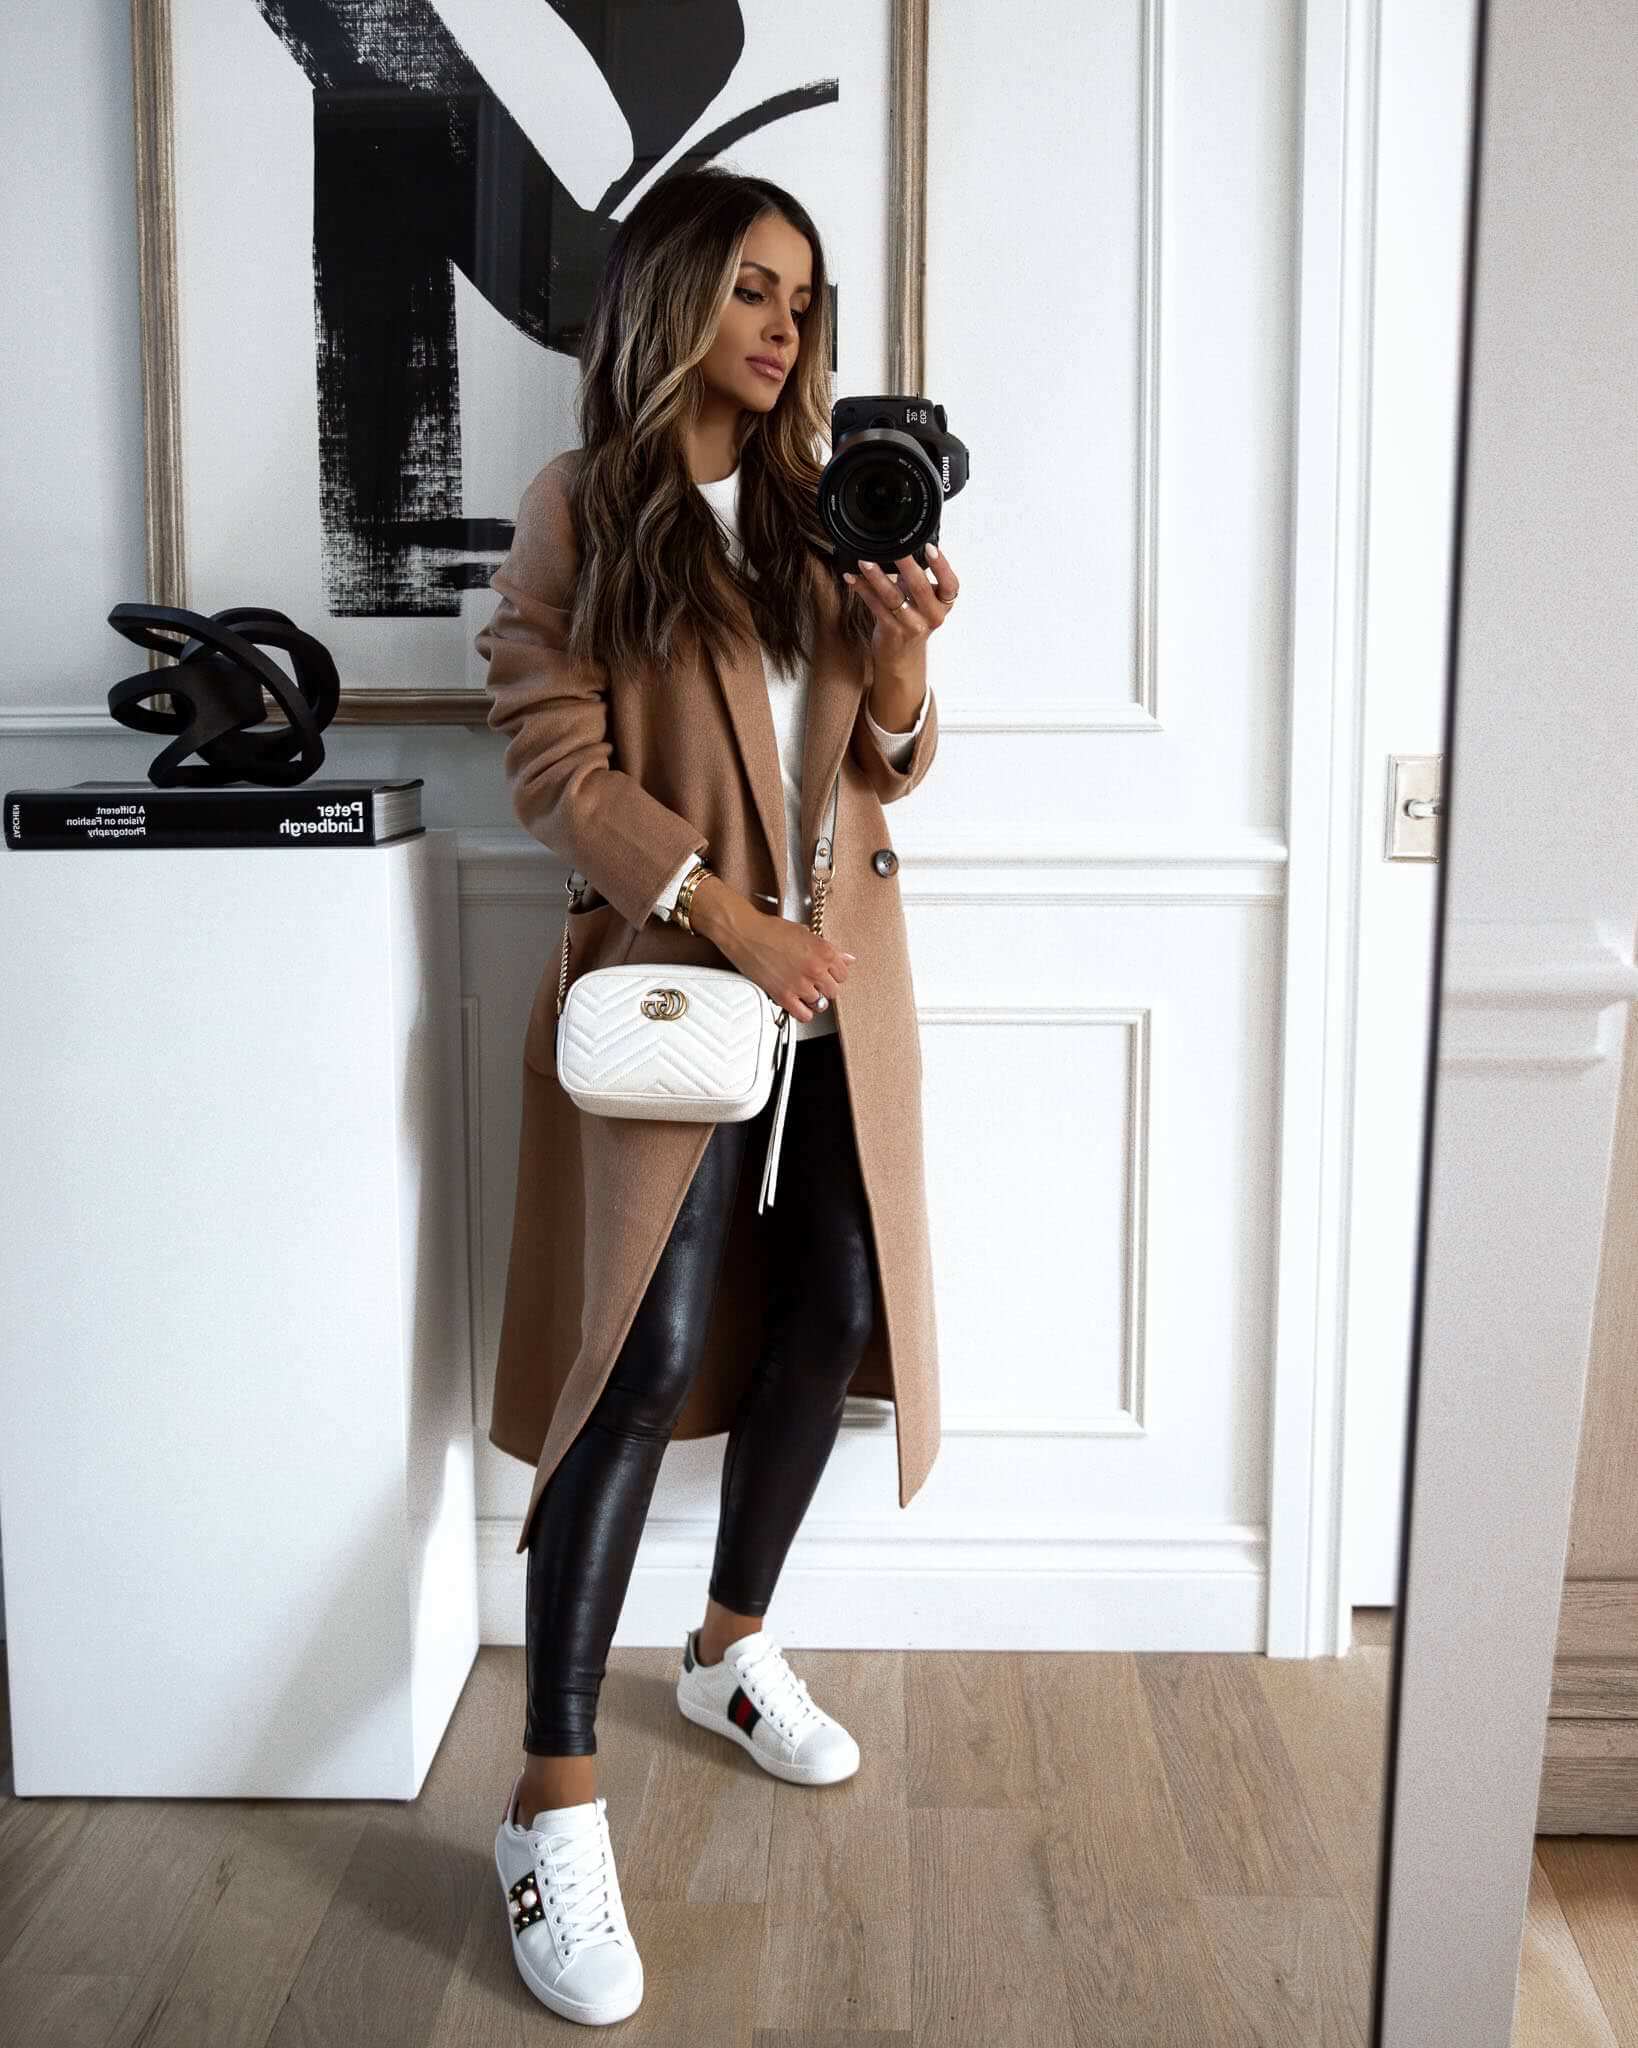 mia mia mine wearing a camel coat and spanx leather leggings from the nsale 2020